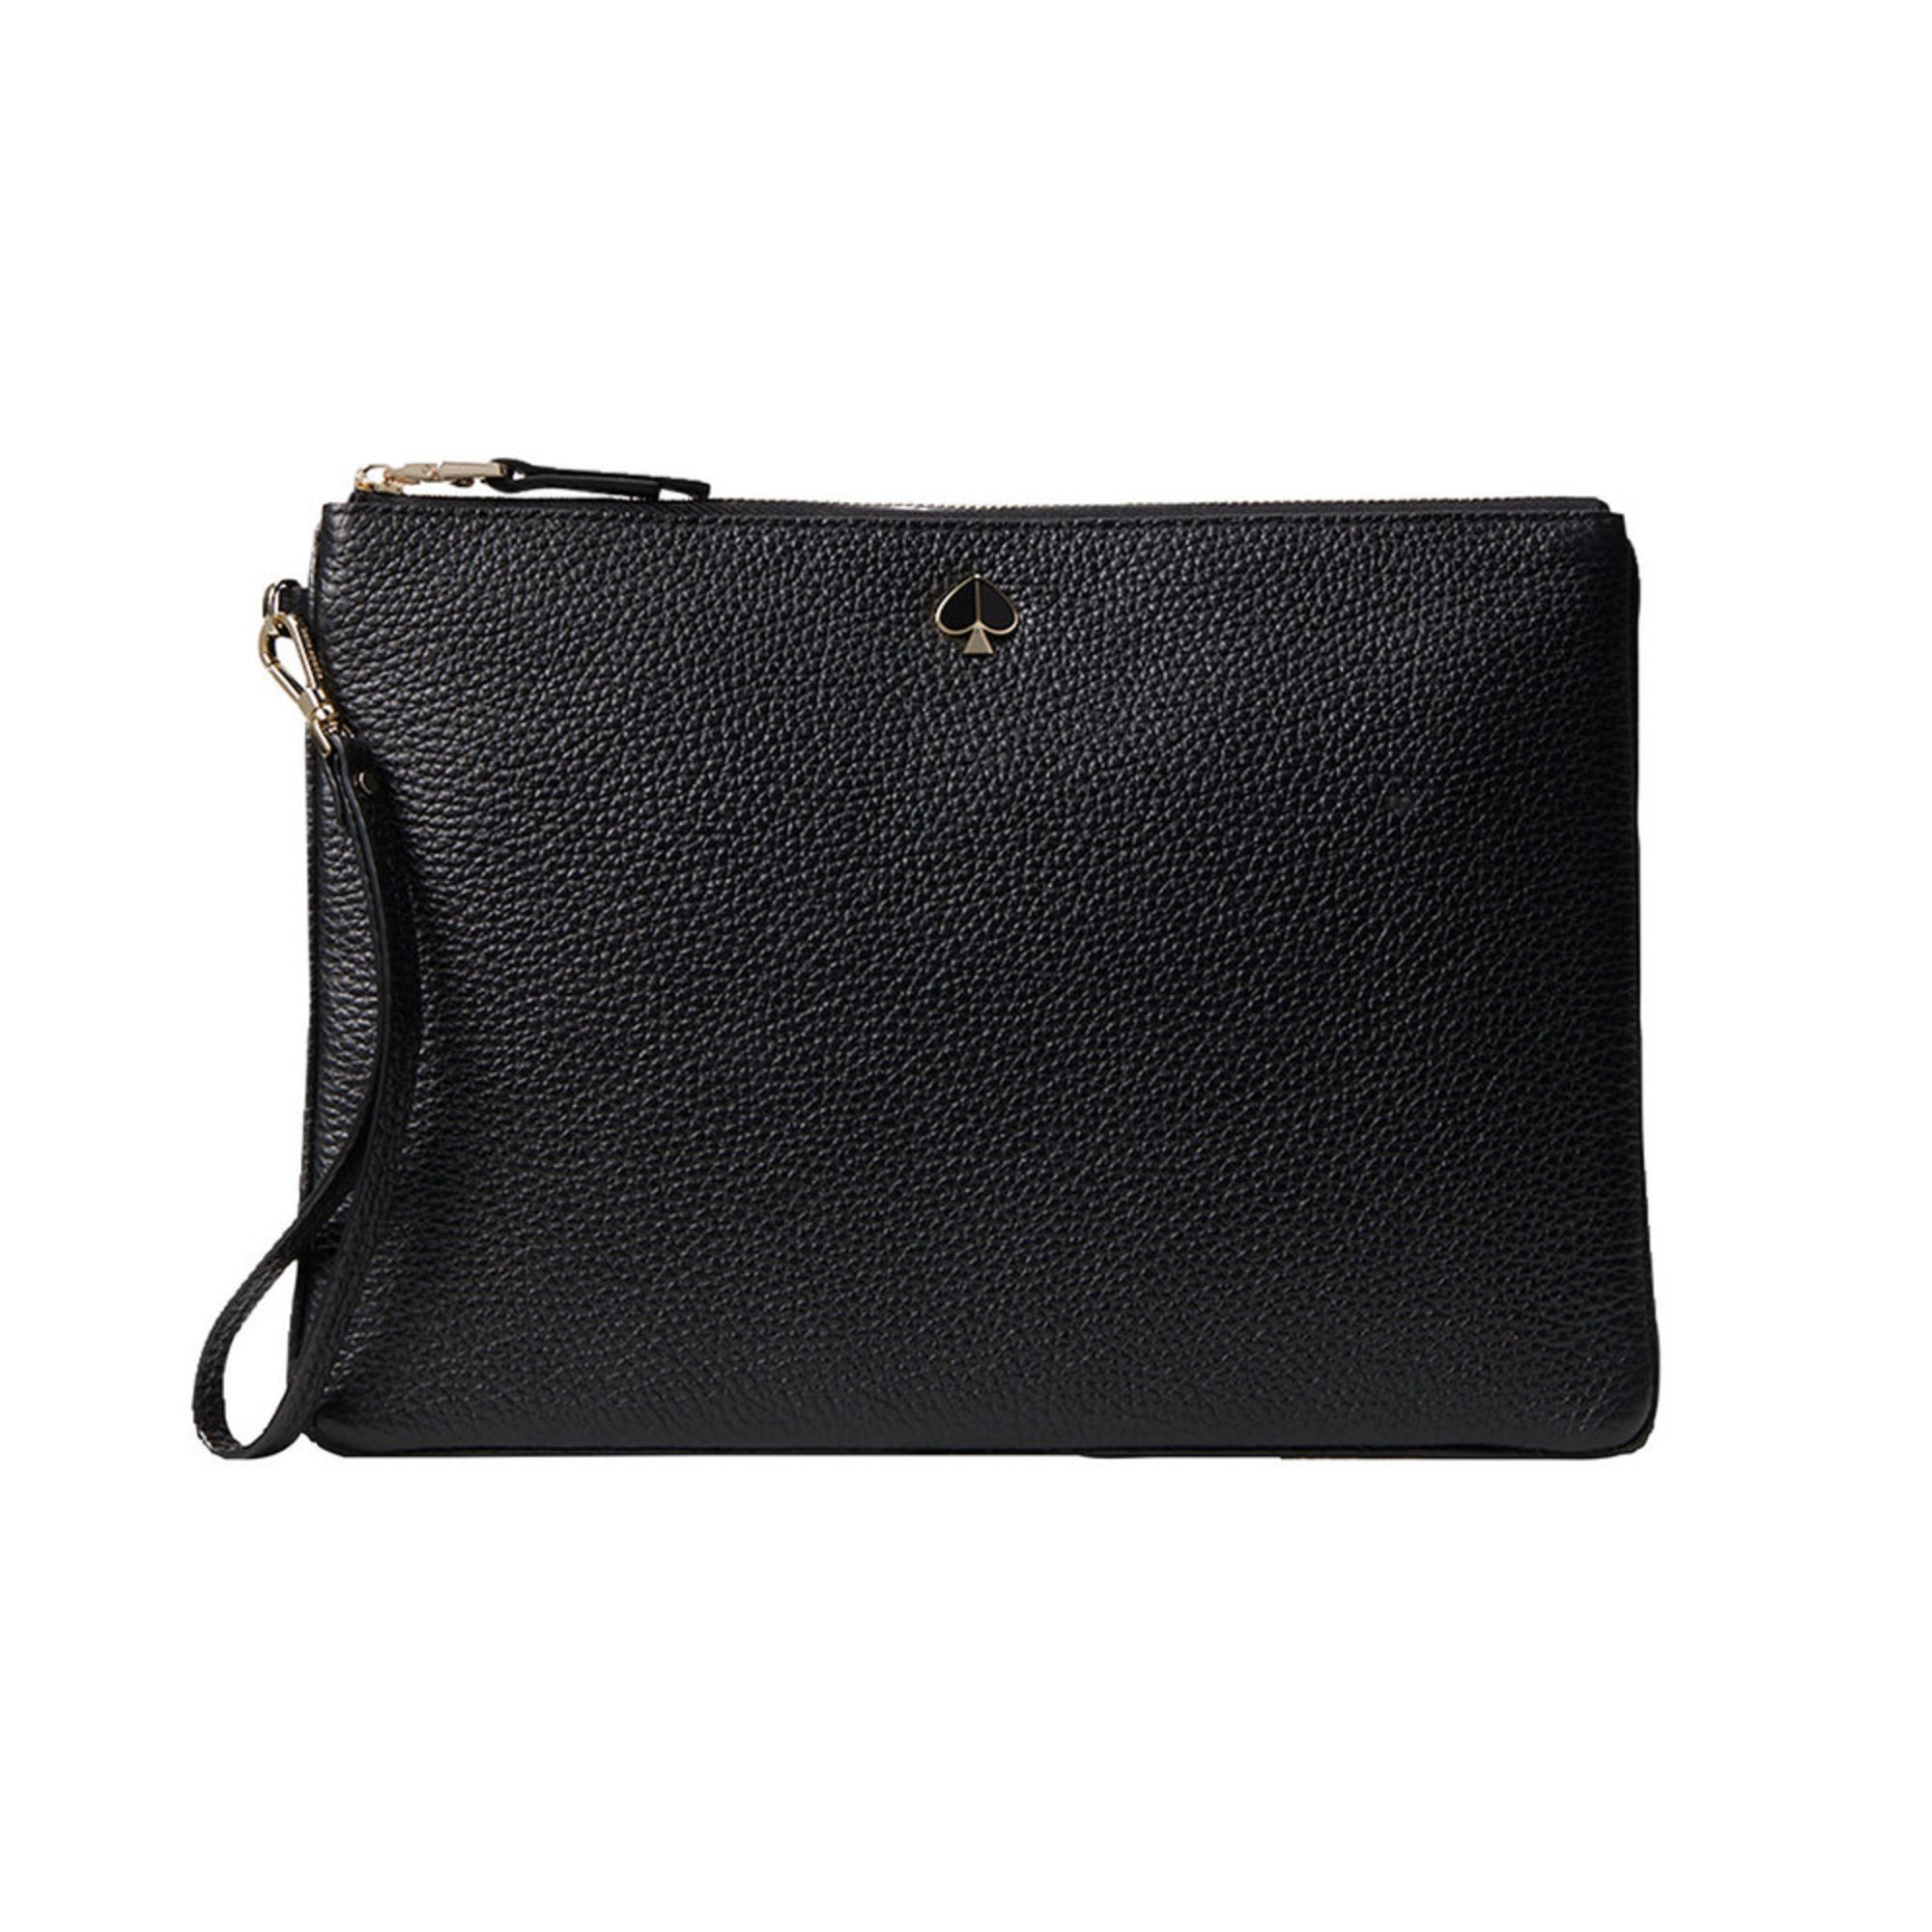 Kate Spade Polly Large Pouch Wristlet | Women's Wallets & Accessories ...